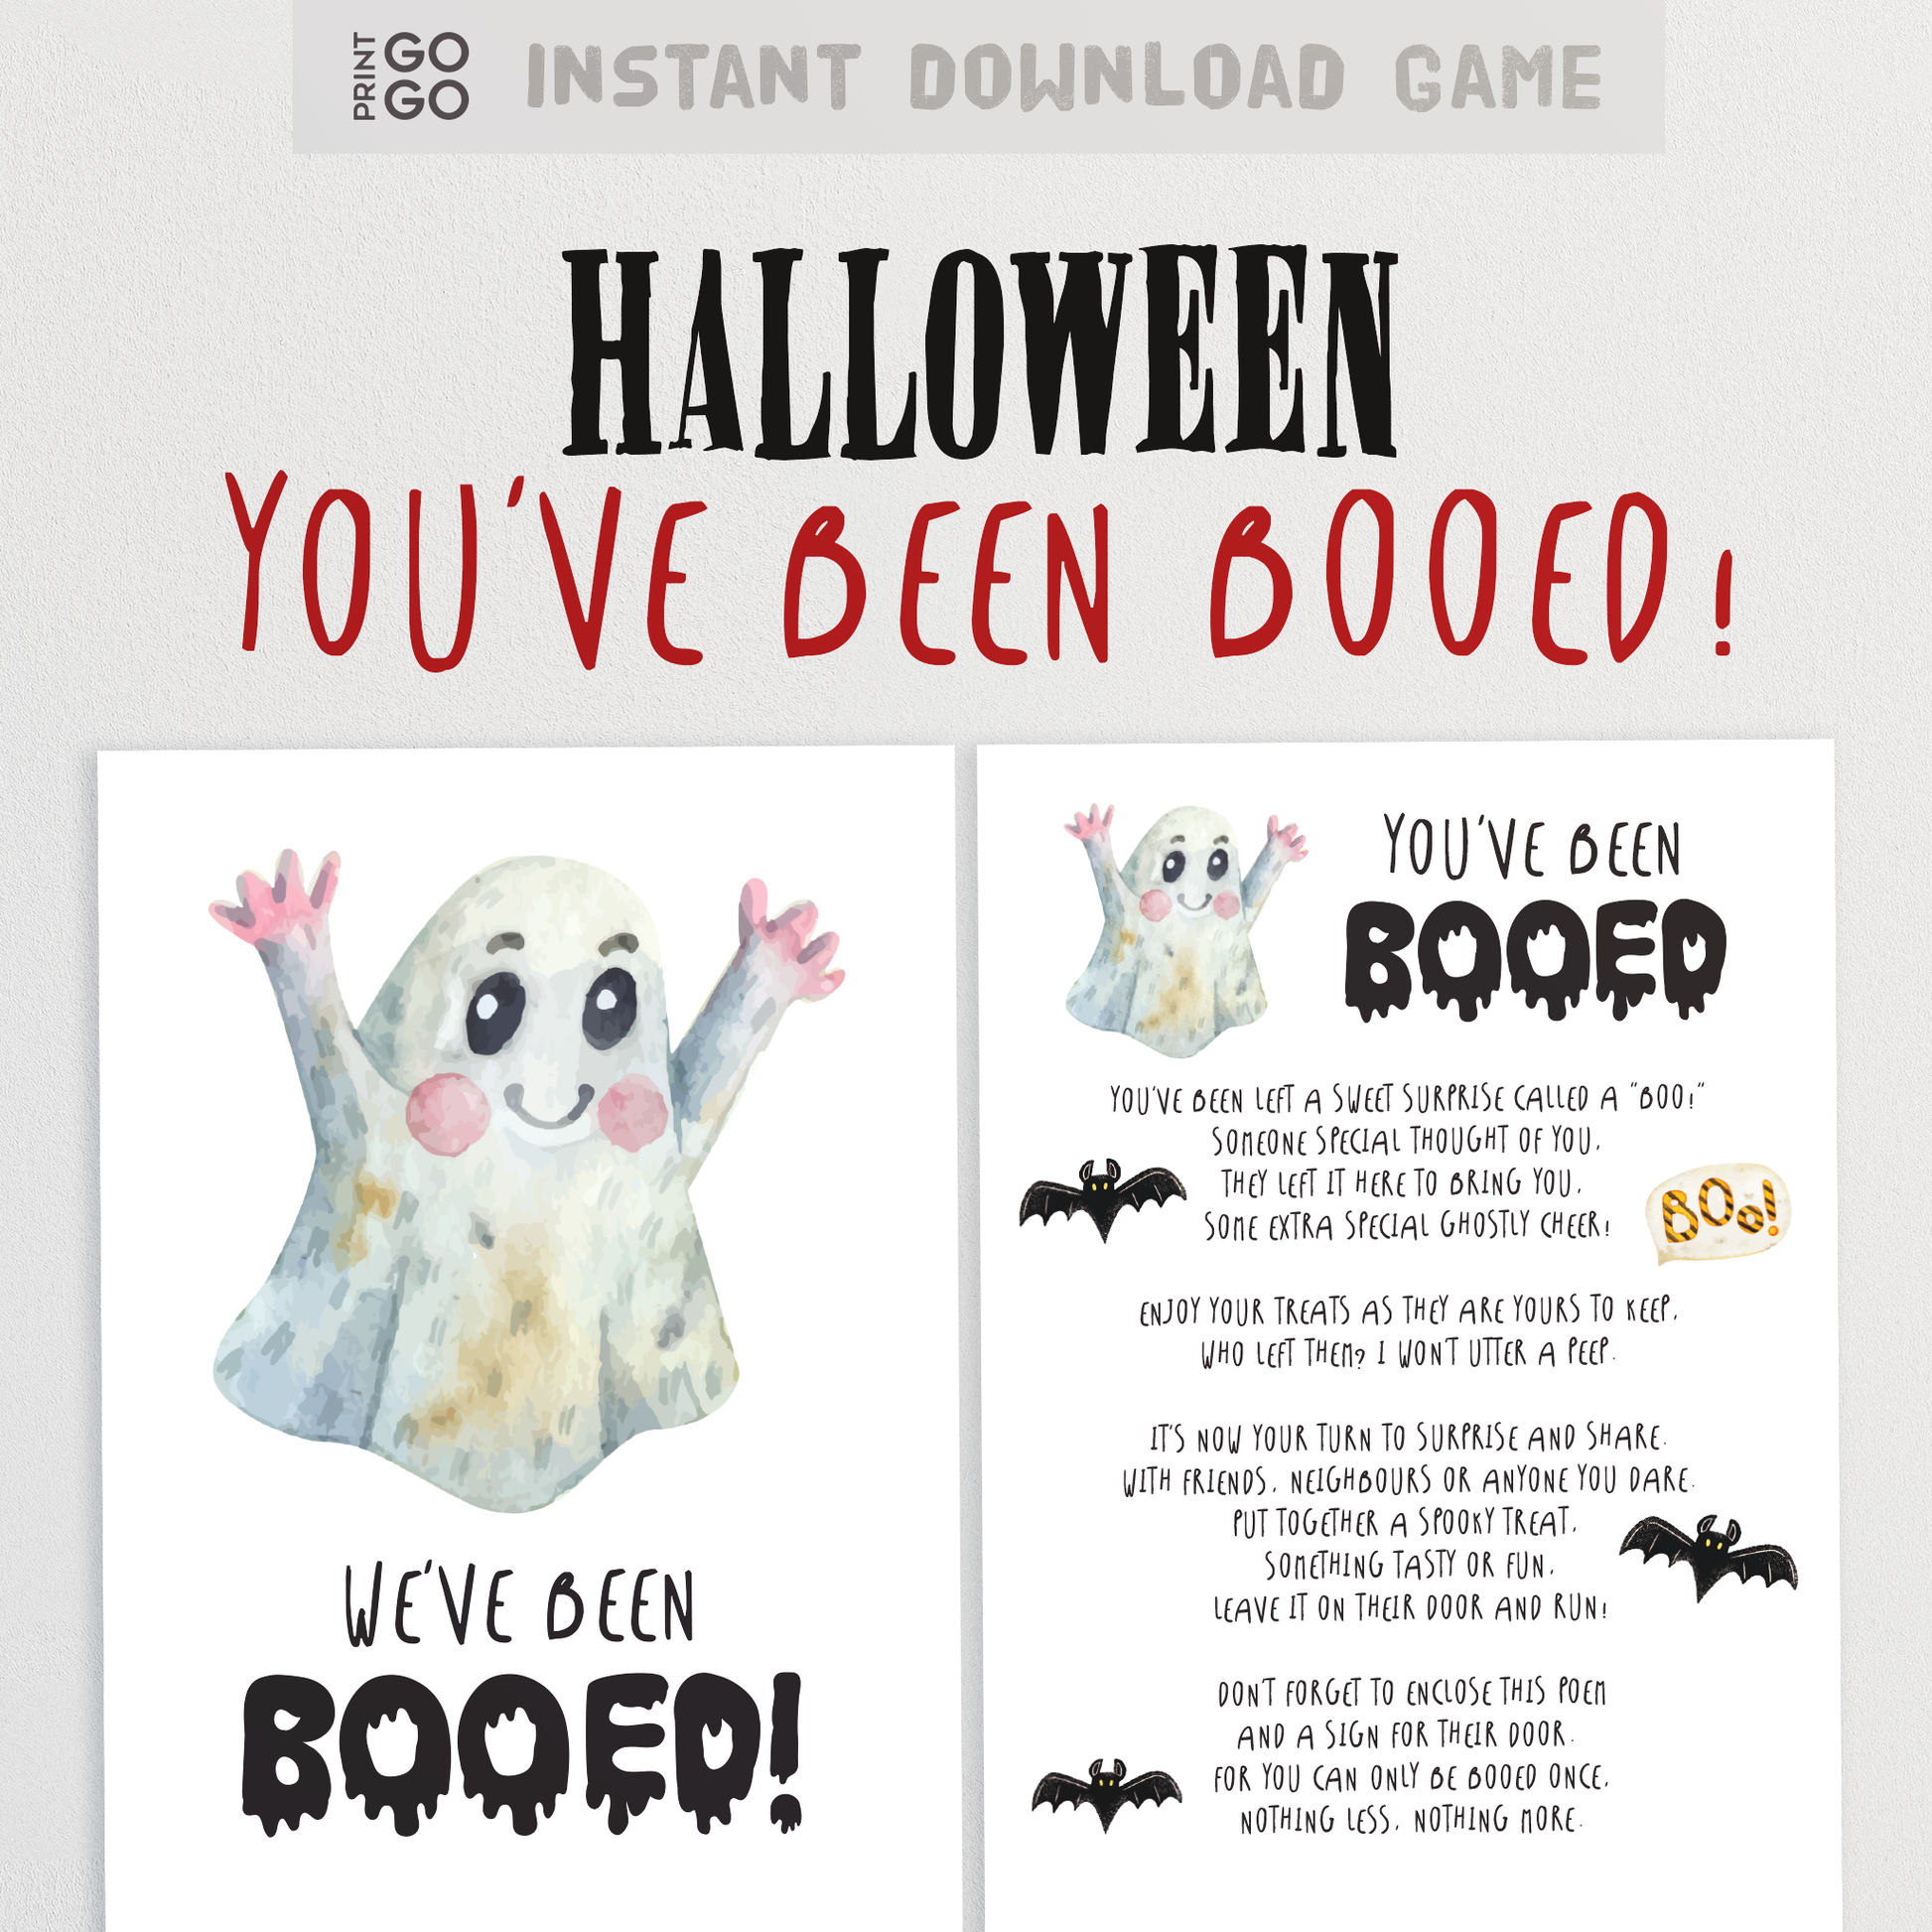 Halloween You've Been Booed! Game for Kids